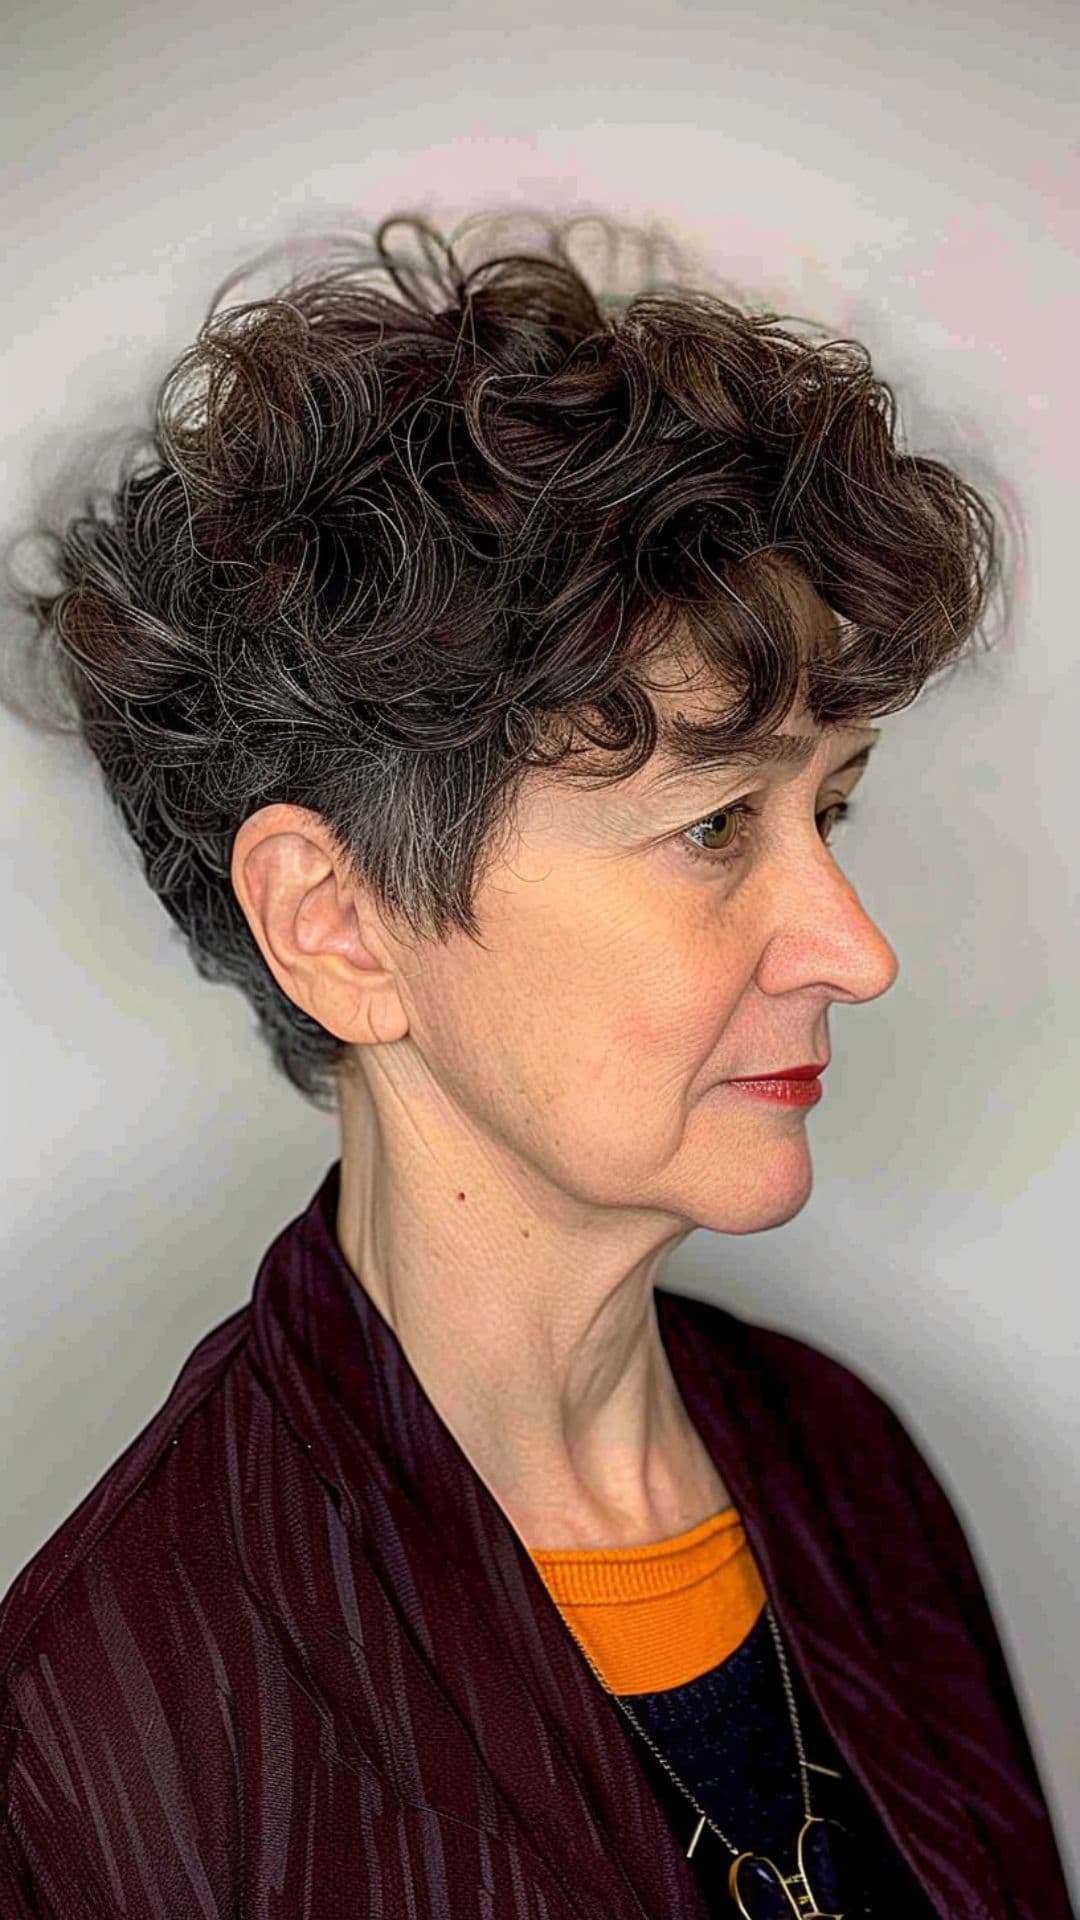 An old woman modelling a curly tapered cut hair.